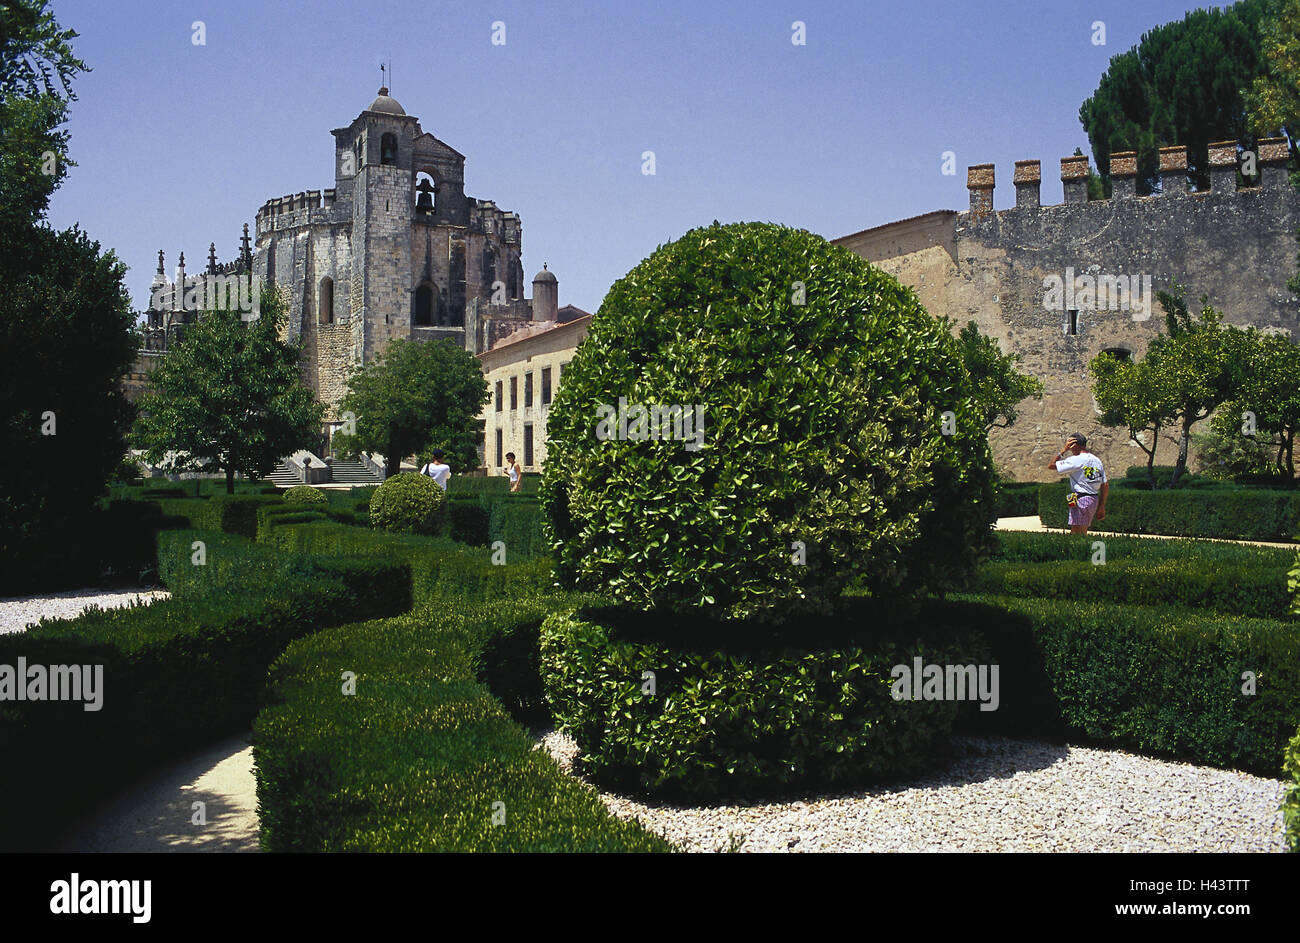 Portugal, Tomar, Christ's cloister, Convento de Cristo, Europe, town, landmark, place of interest, cloister, cloister plant, minster, Templar, UNESCO-world cultural heritage, Christ's order, Christ's knight, historically, in 1162, Stock Photo